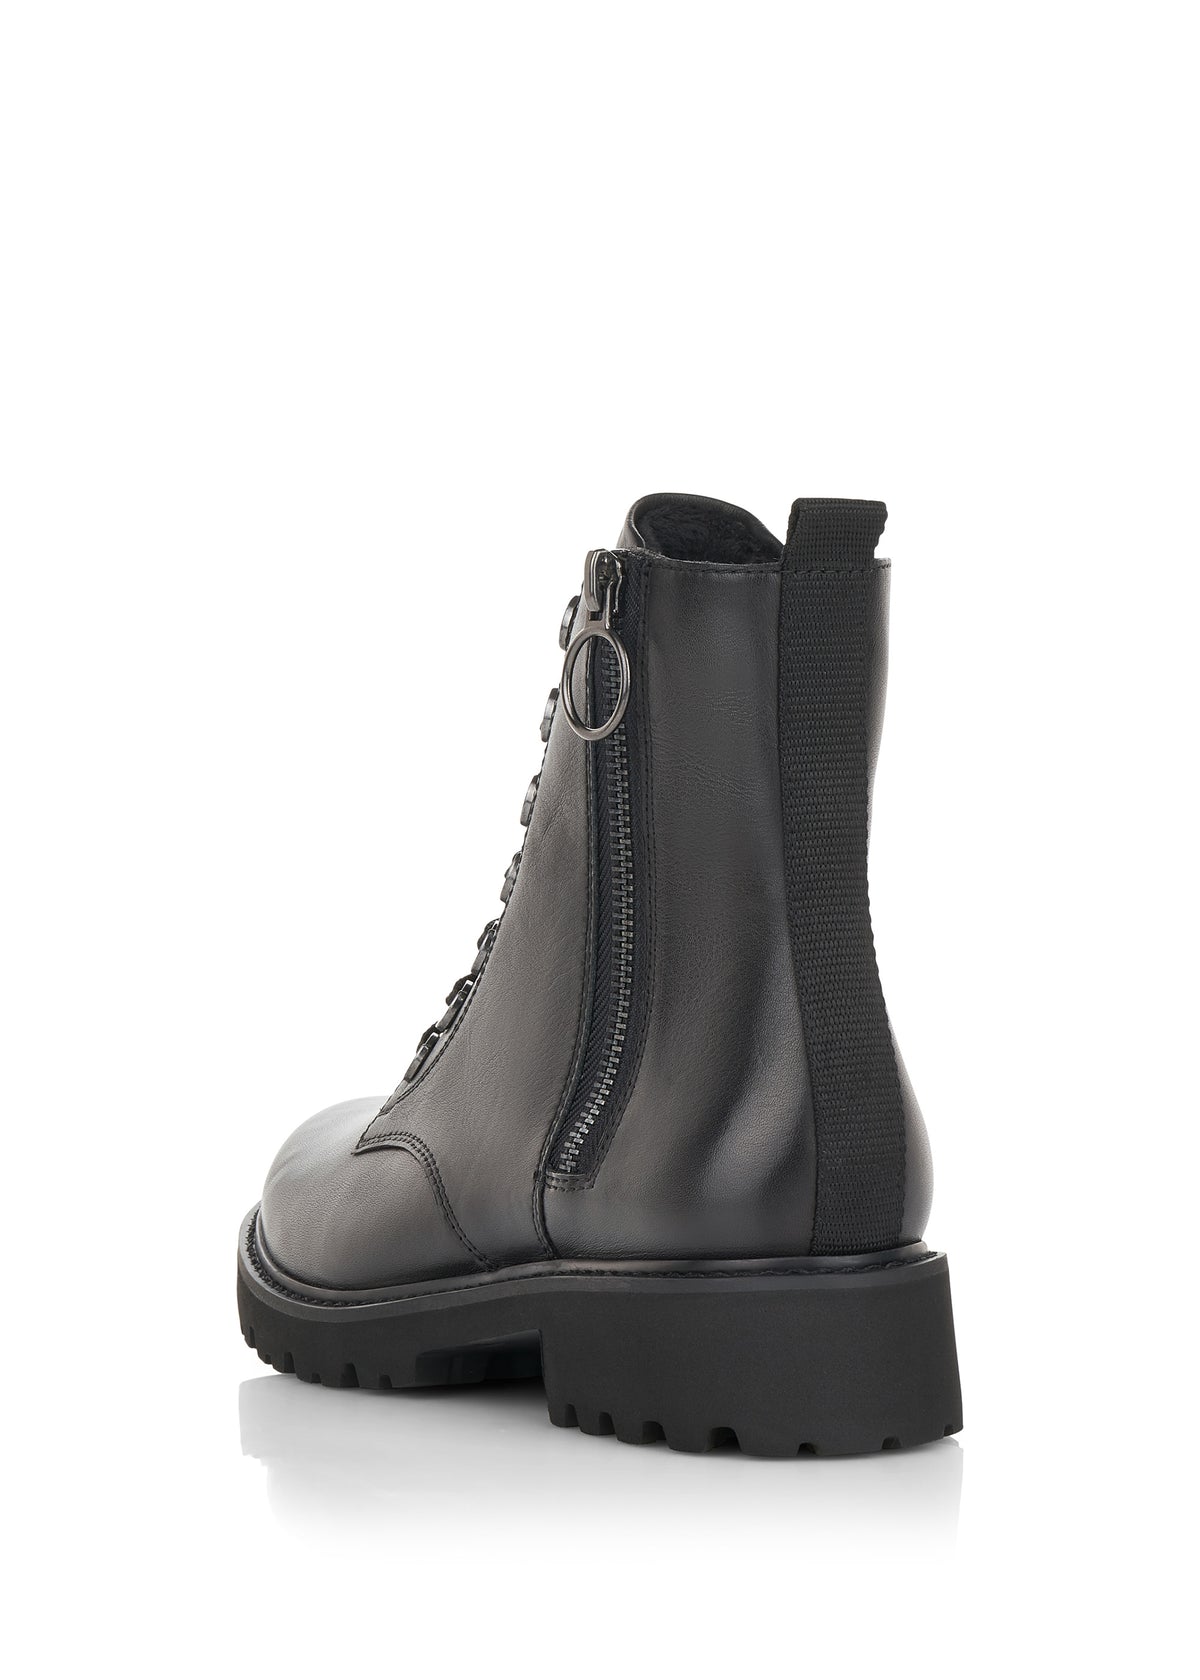 Maihari ankle boots - black